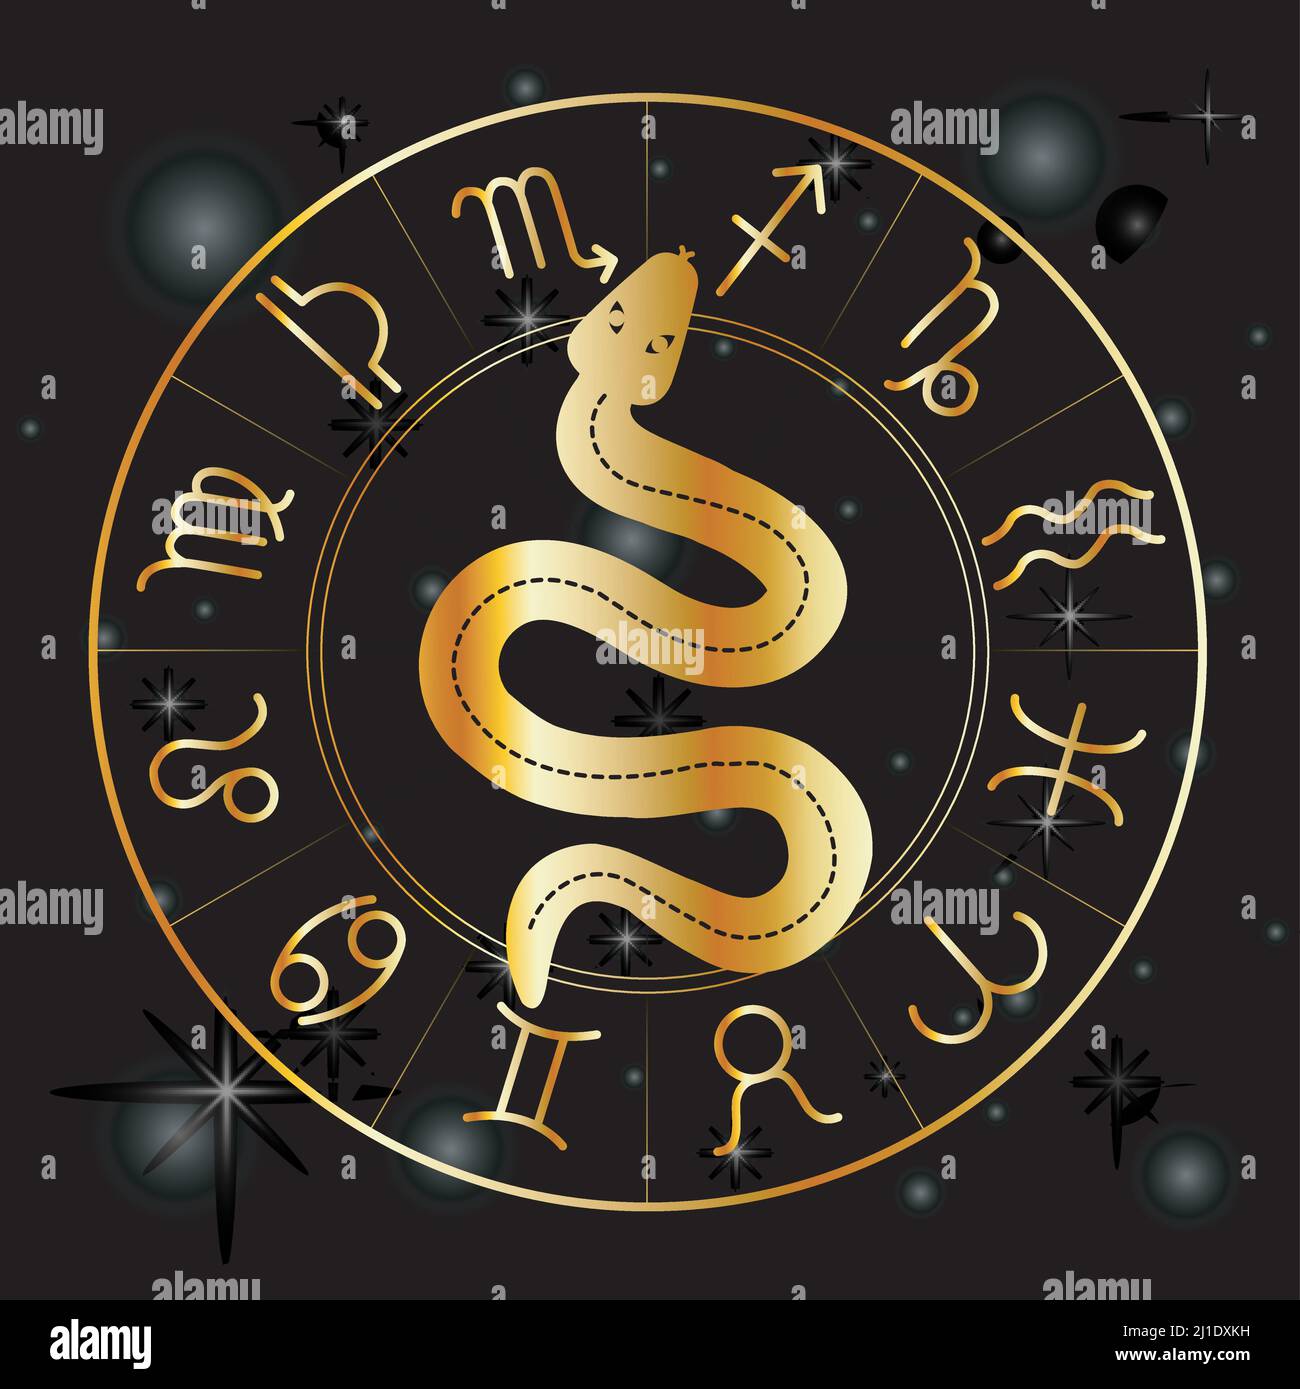 Premium Vector  Chinese feng shui astrological symbols, fire